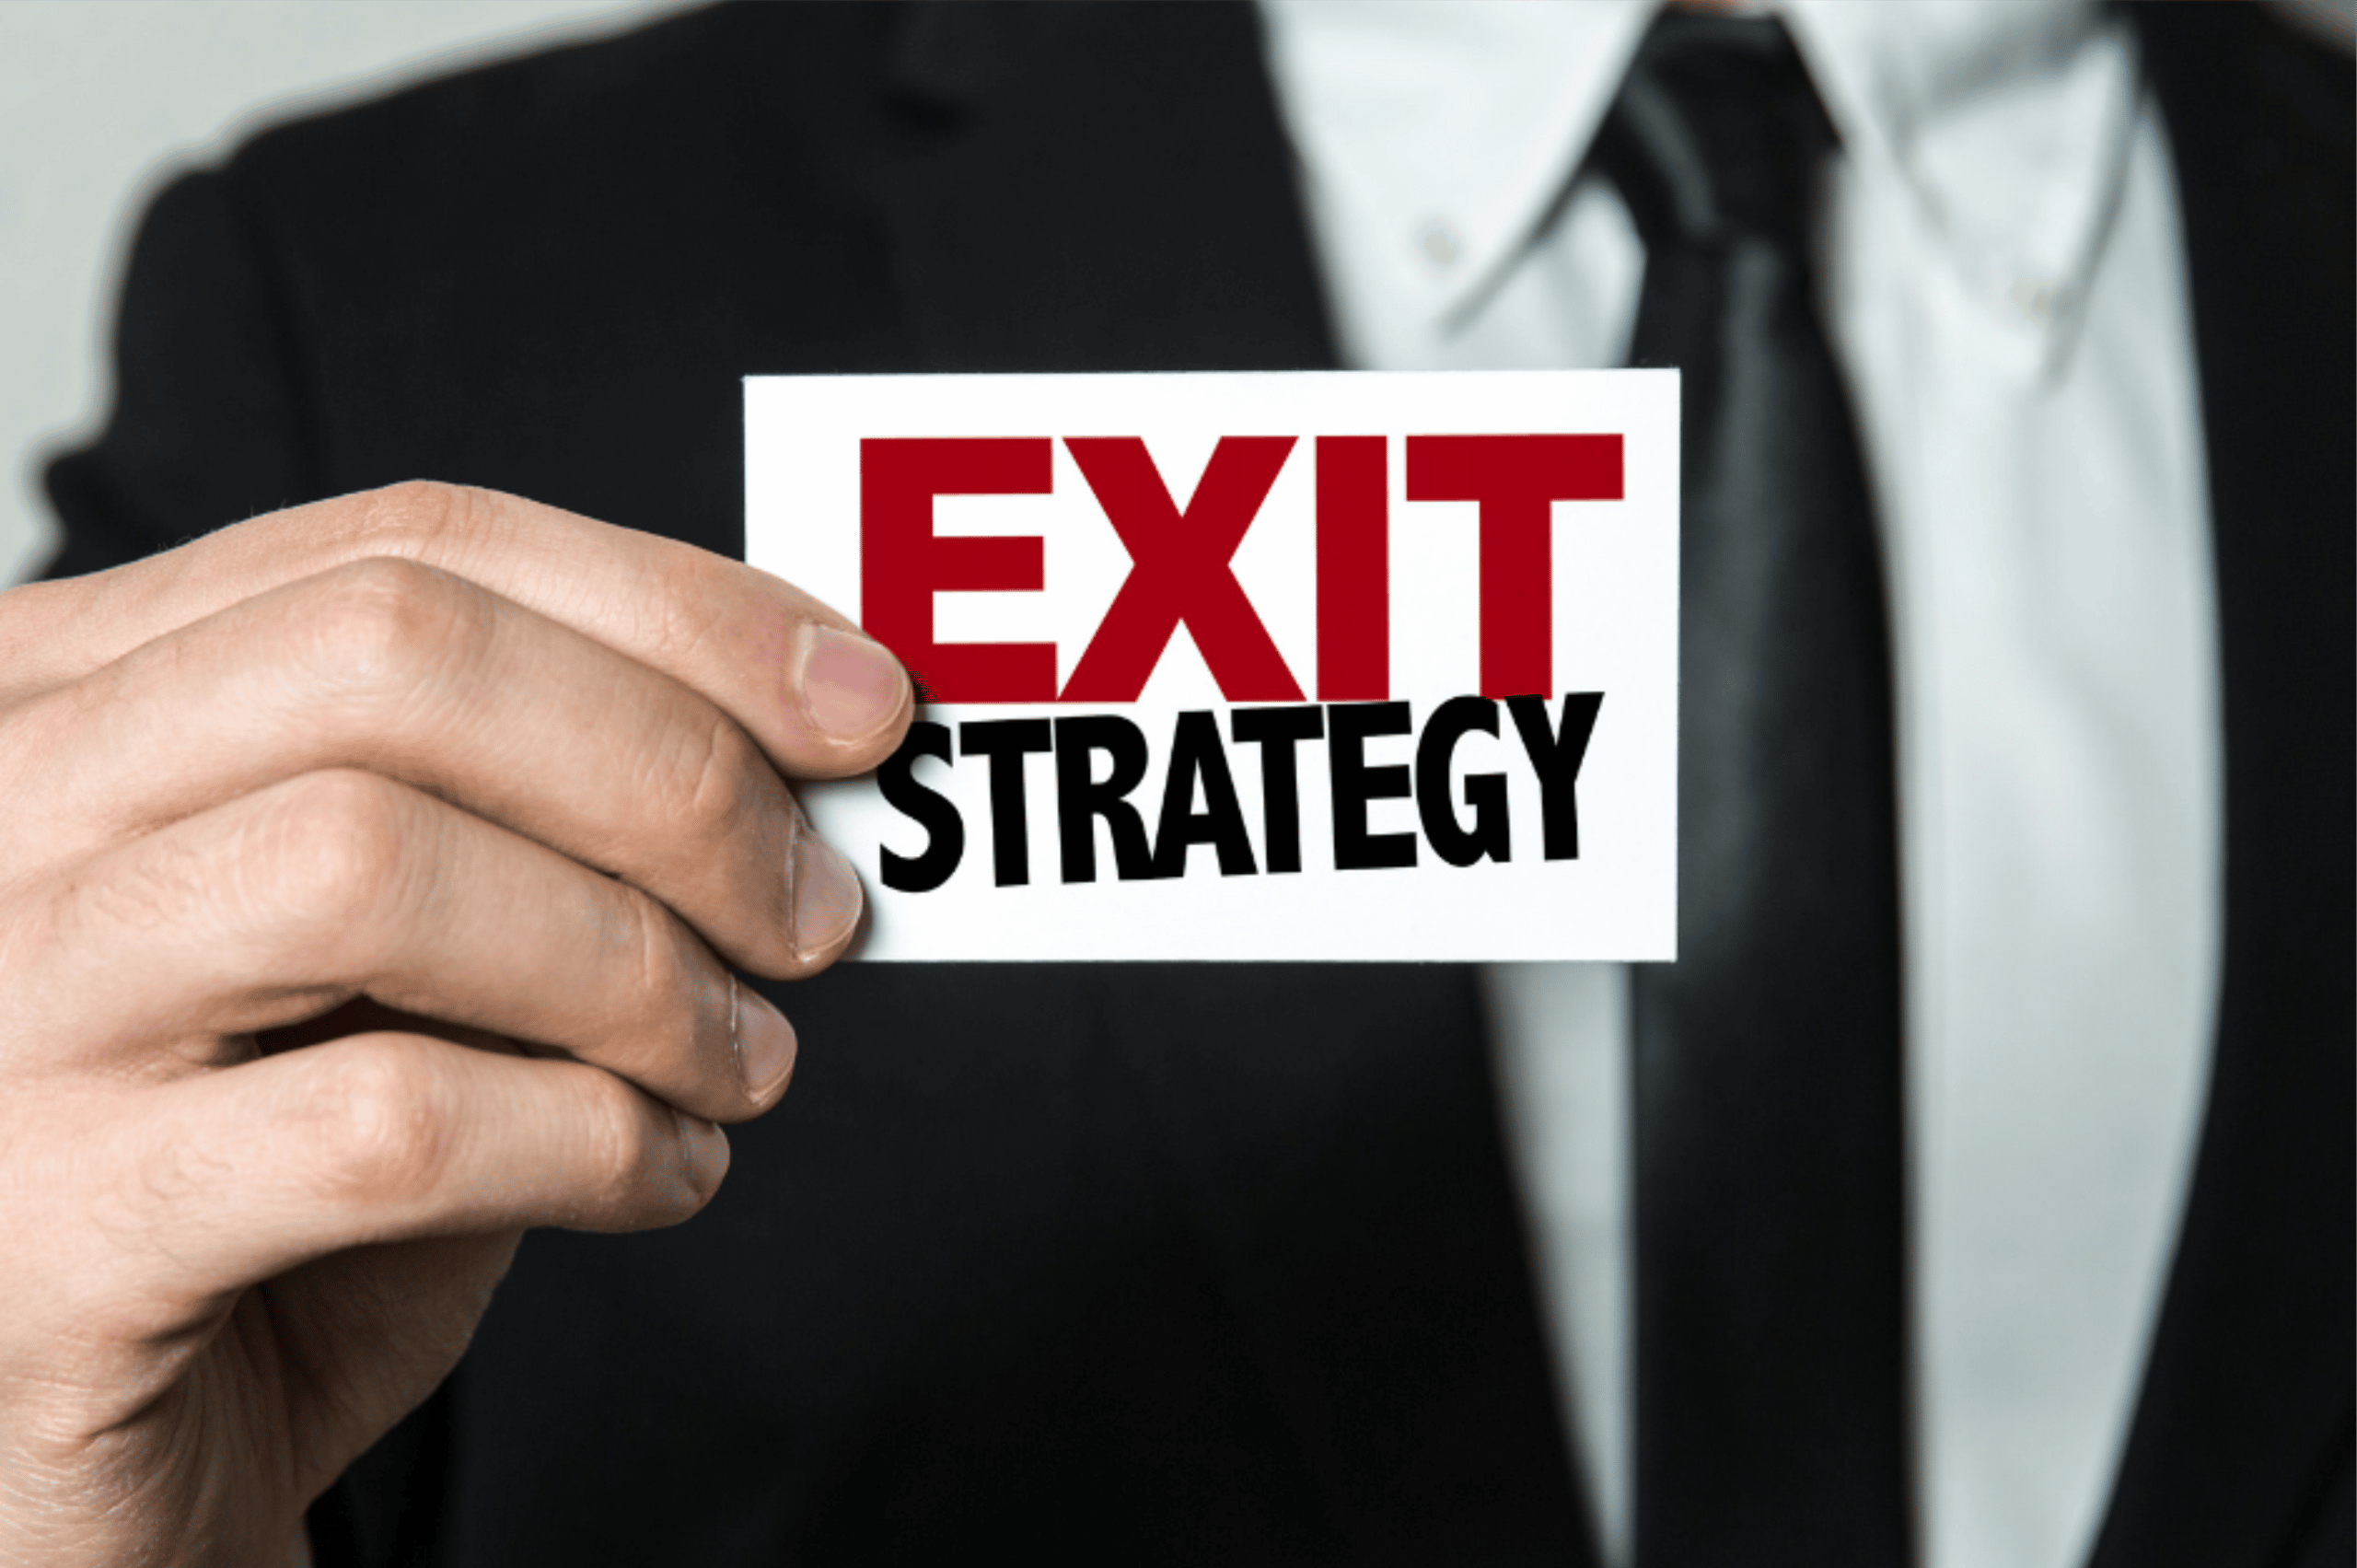 What are the 4 business exit strategies